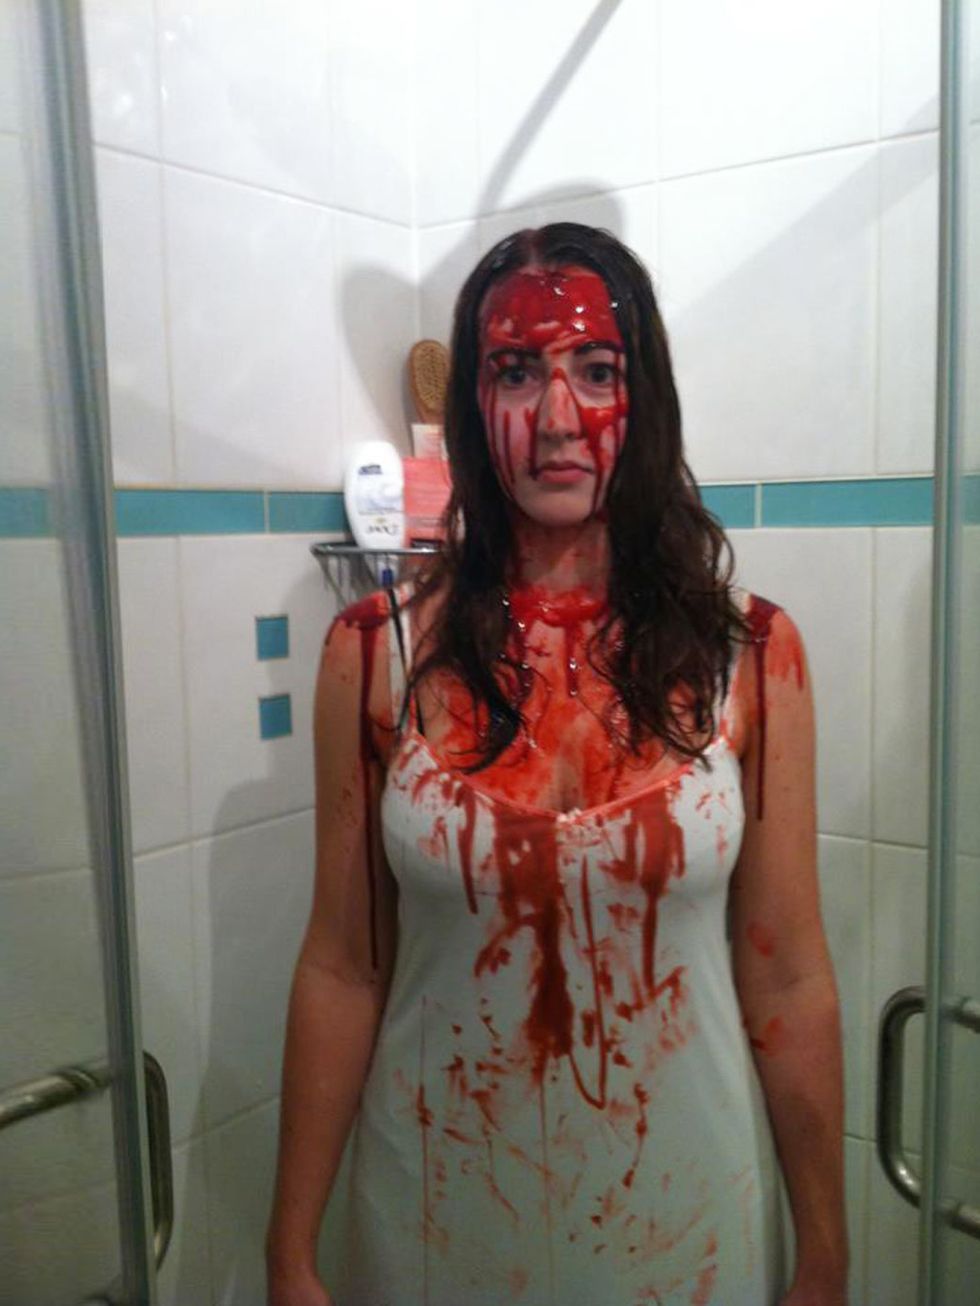 <p><strong>Debbie Morgan - Editorial Business Manager</strong></p><p>'I actually didn't smile for the first few hours of the evening, because I physically couldn't - the fake blood had congealed so hard! But it worked for the creepiness that is my Carrie 